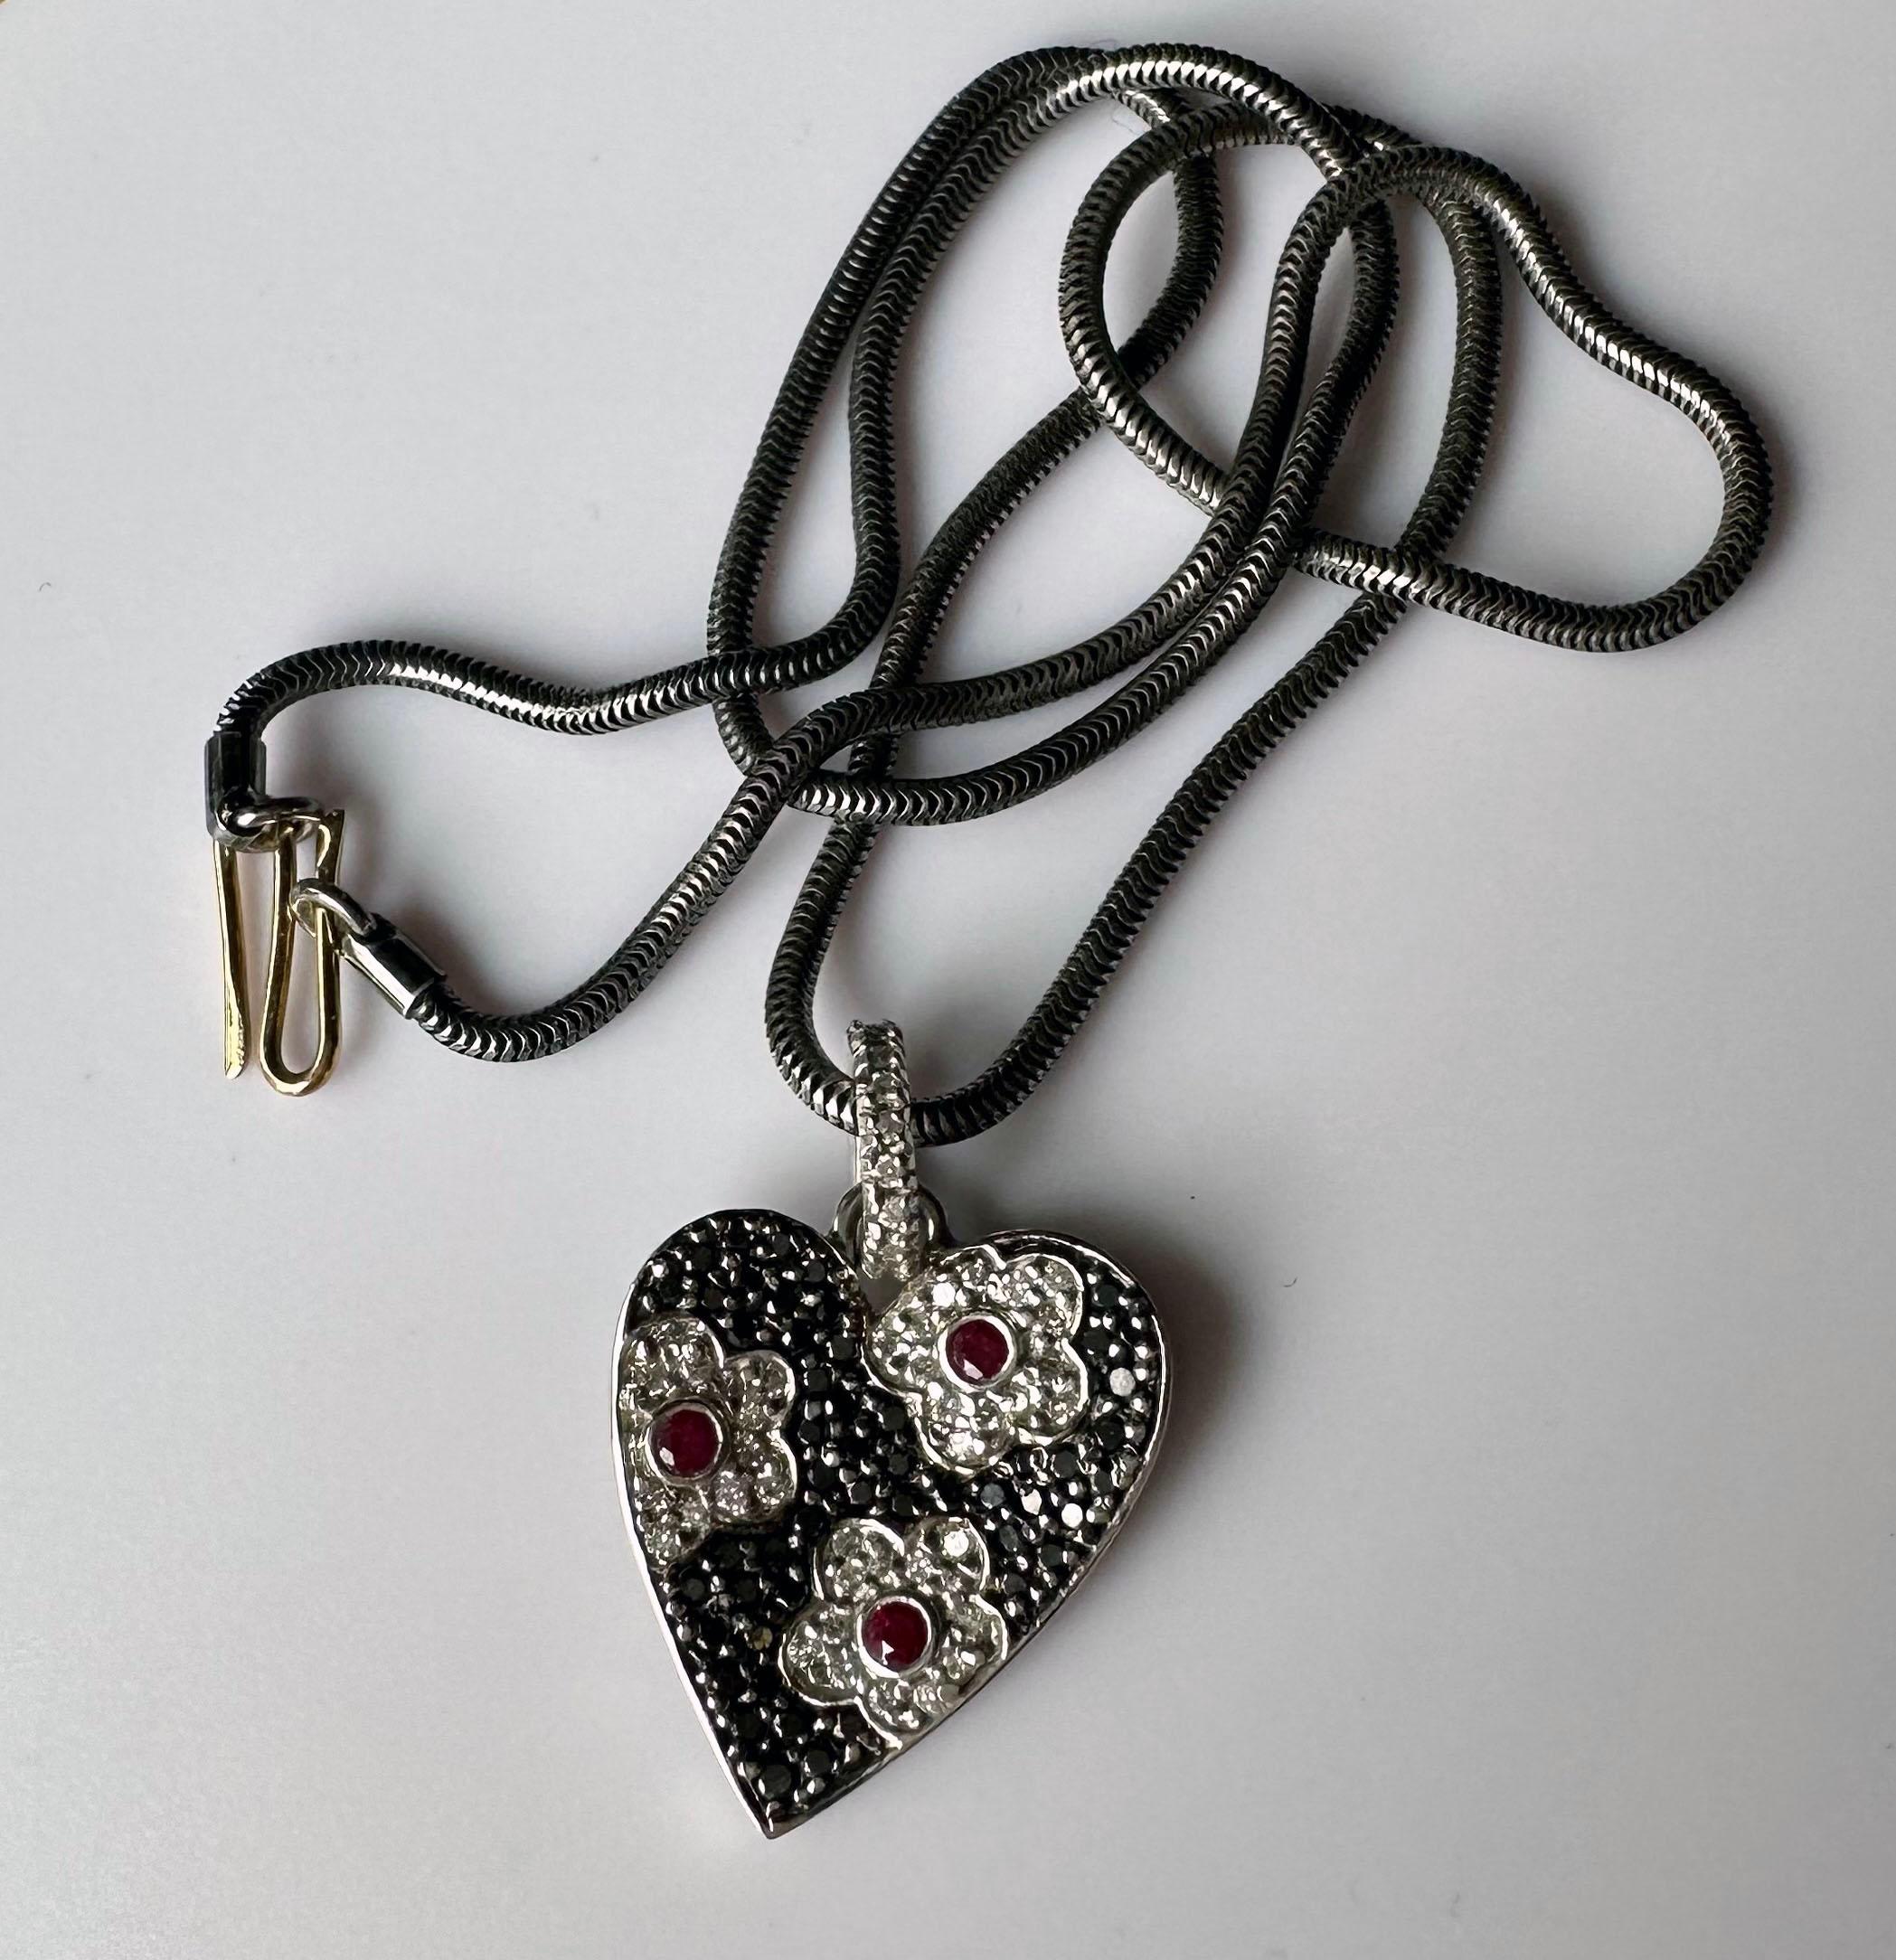 Contemporary An 18kt White Gold Heart Shaped Pendant set with Rubies & Diamonds. For Sale